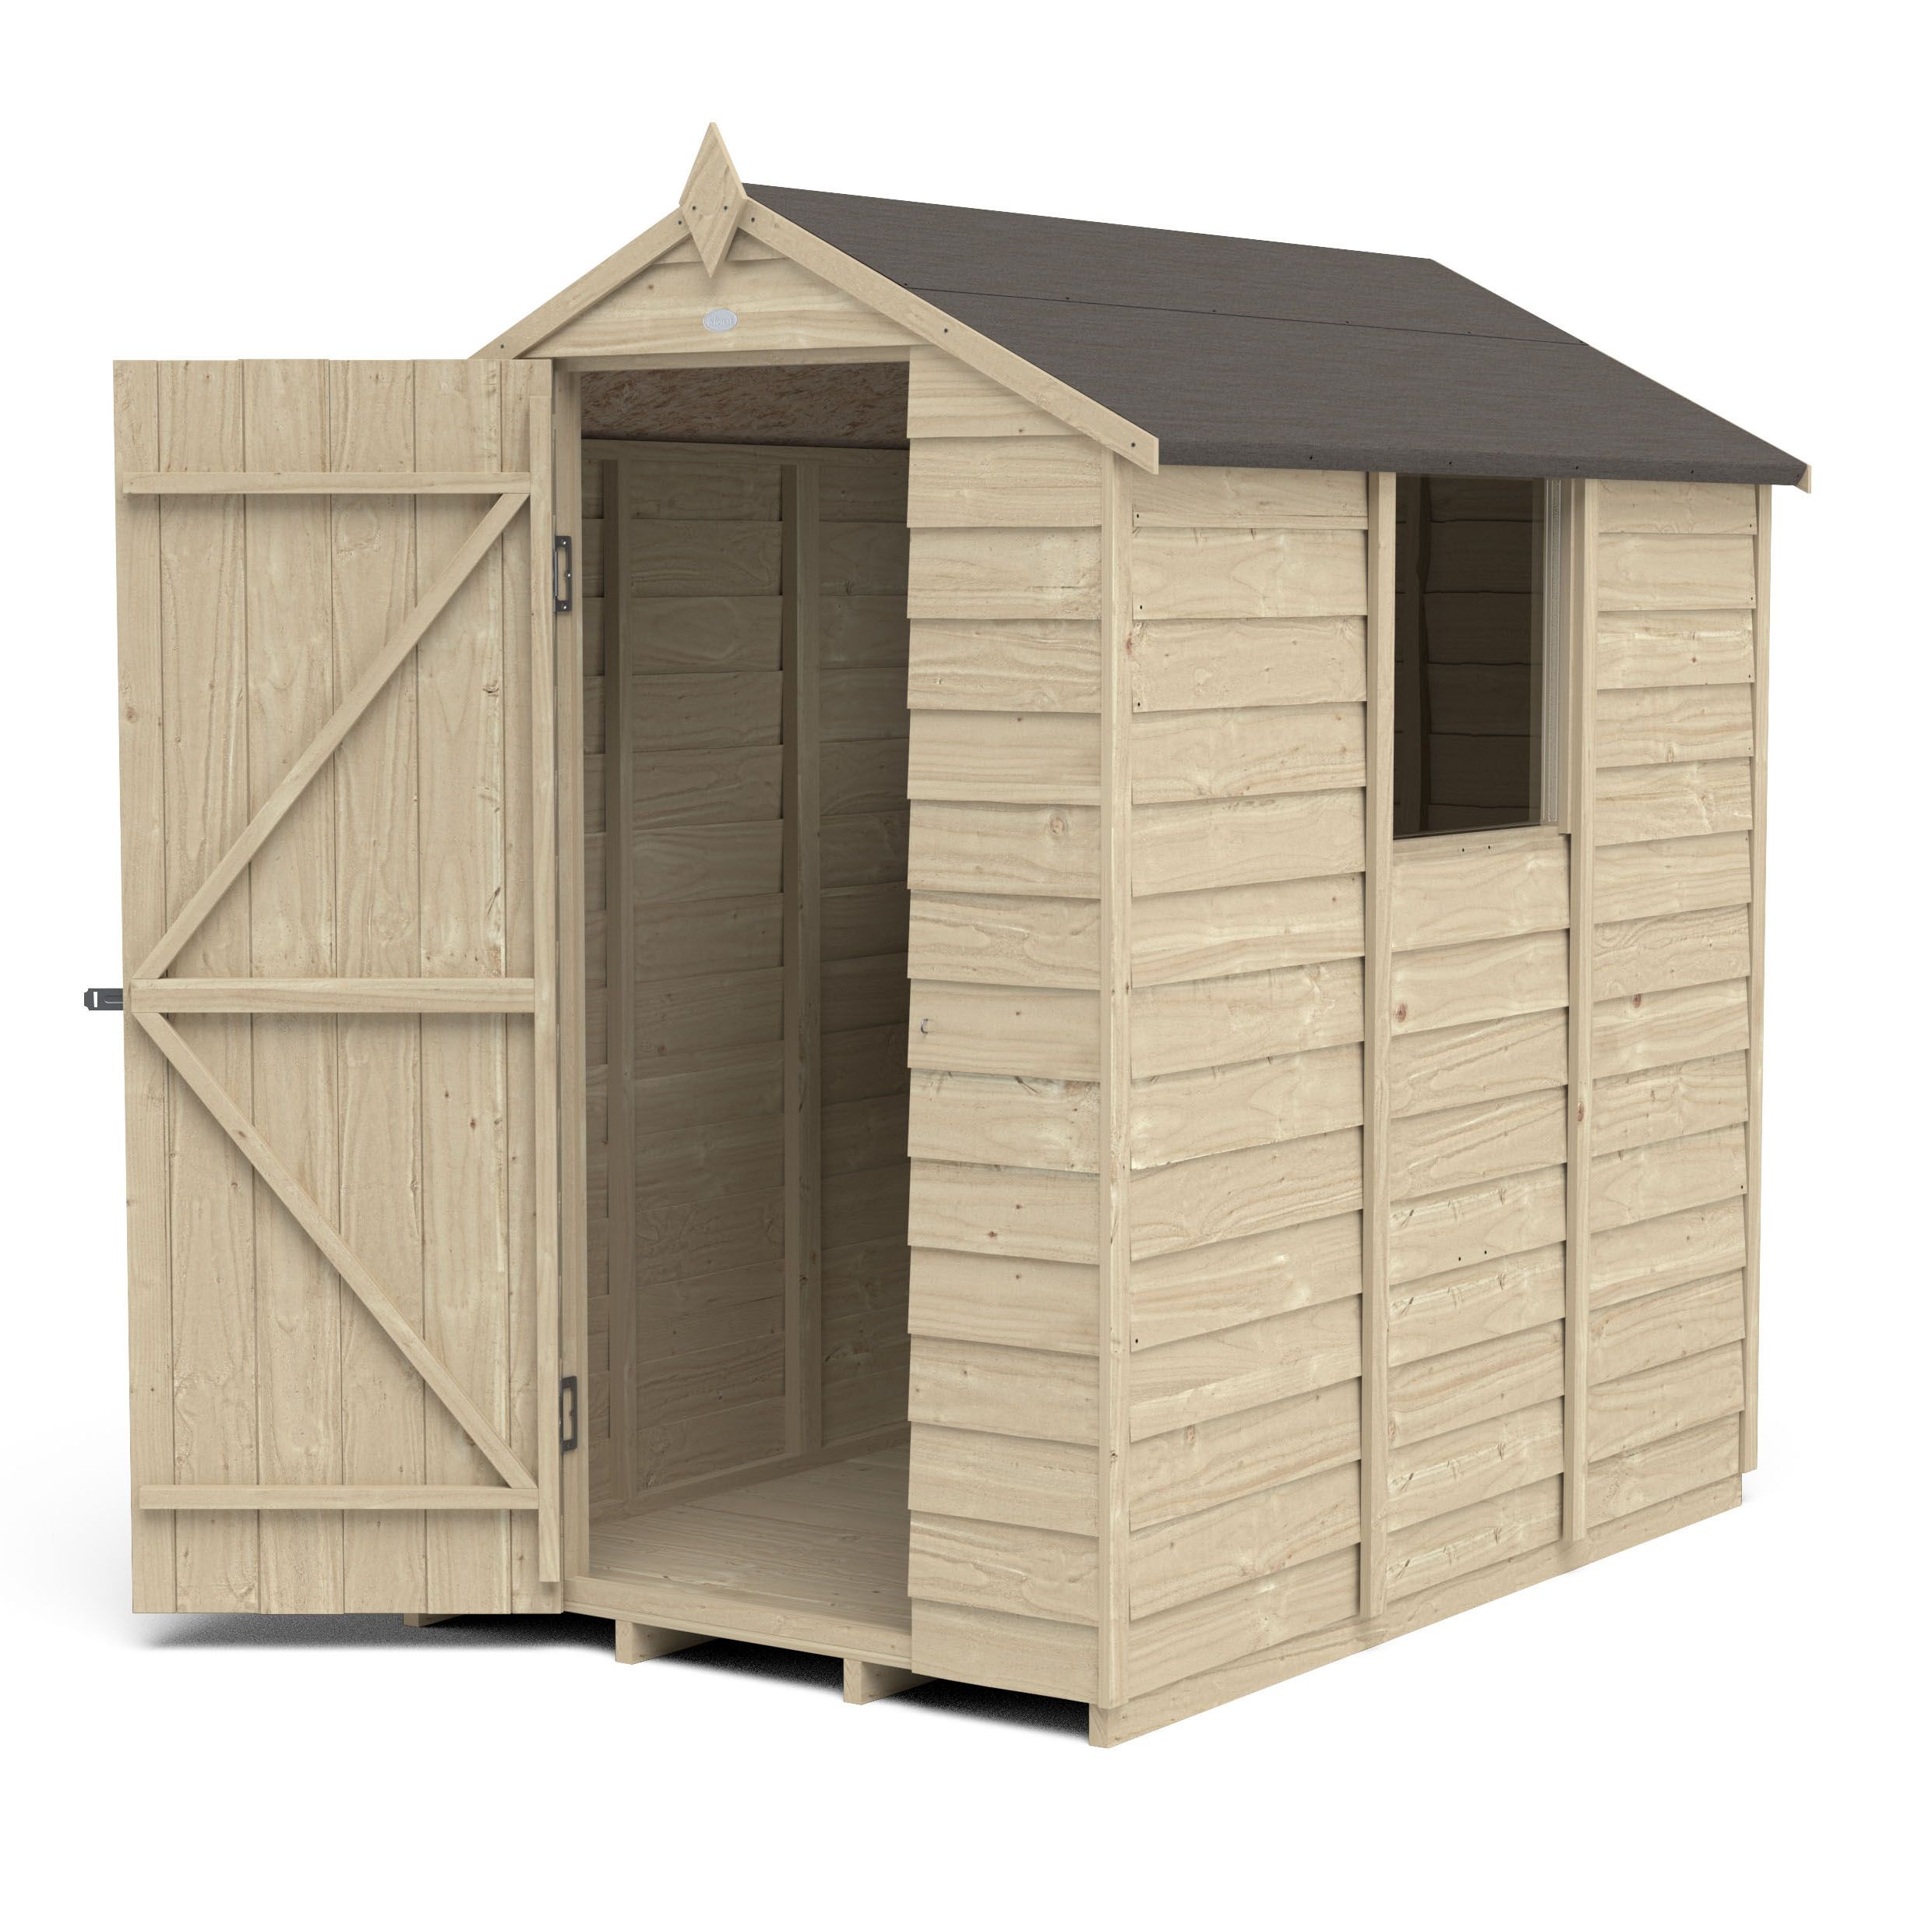 Forest Garden Overlap 6x4 ft Apex Wooden Pressure treated Shed with floor & 1 window